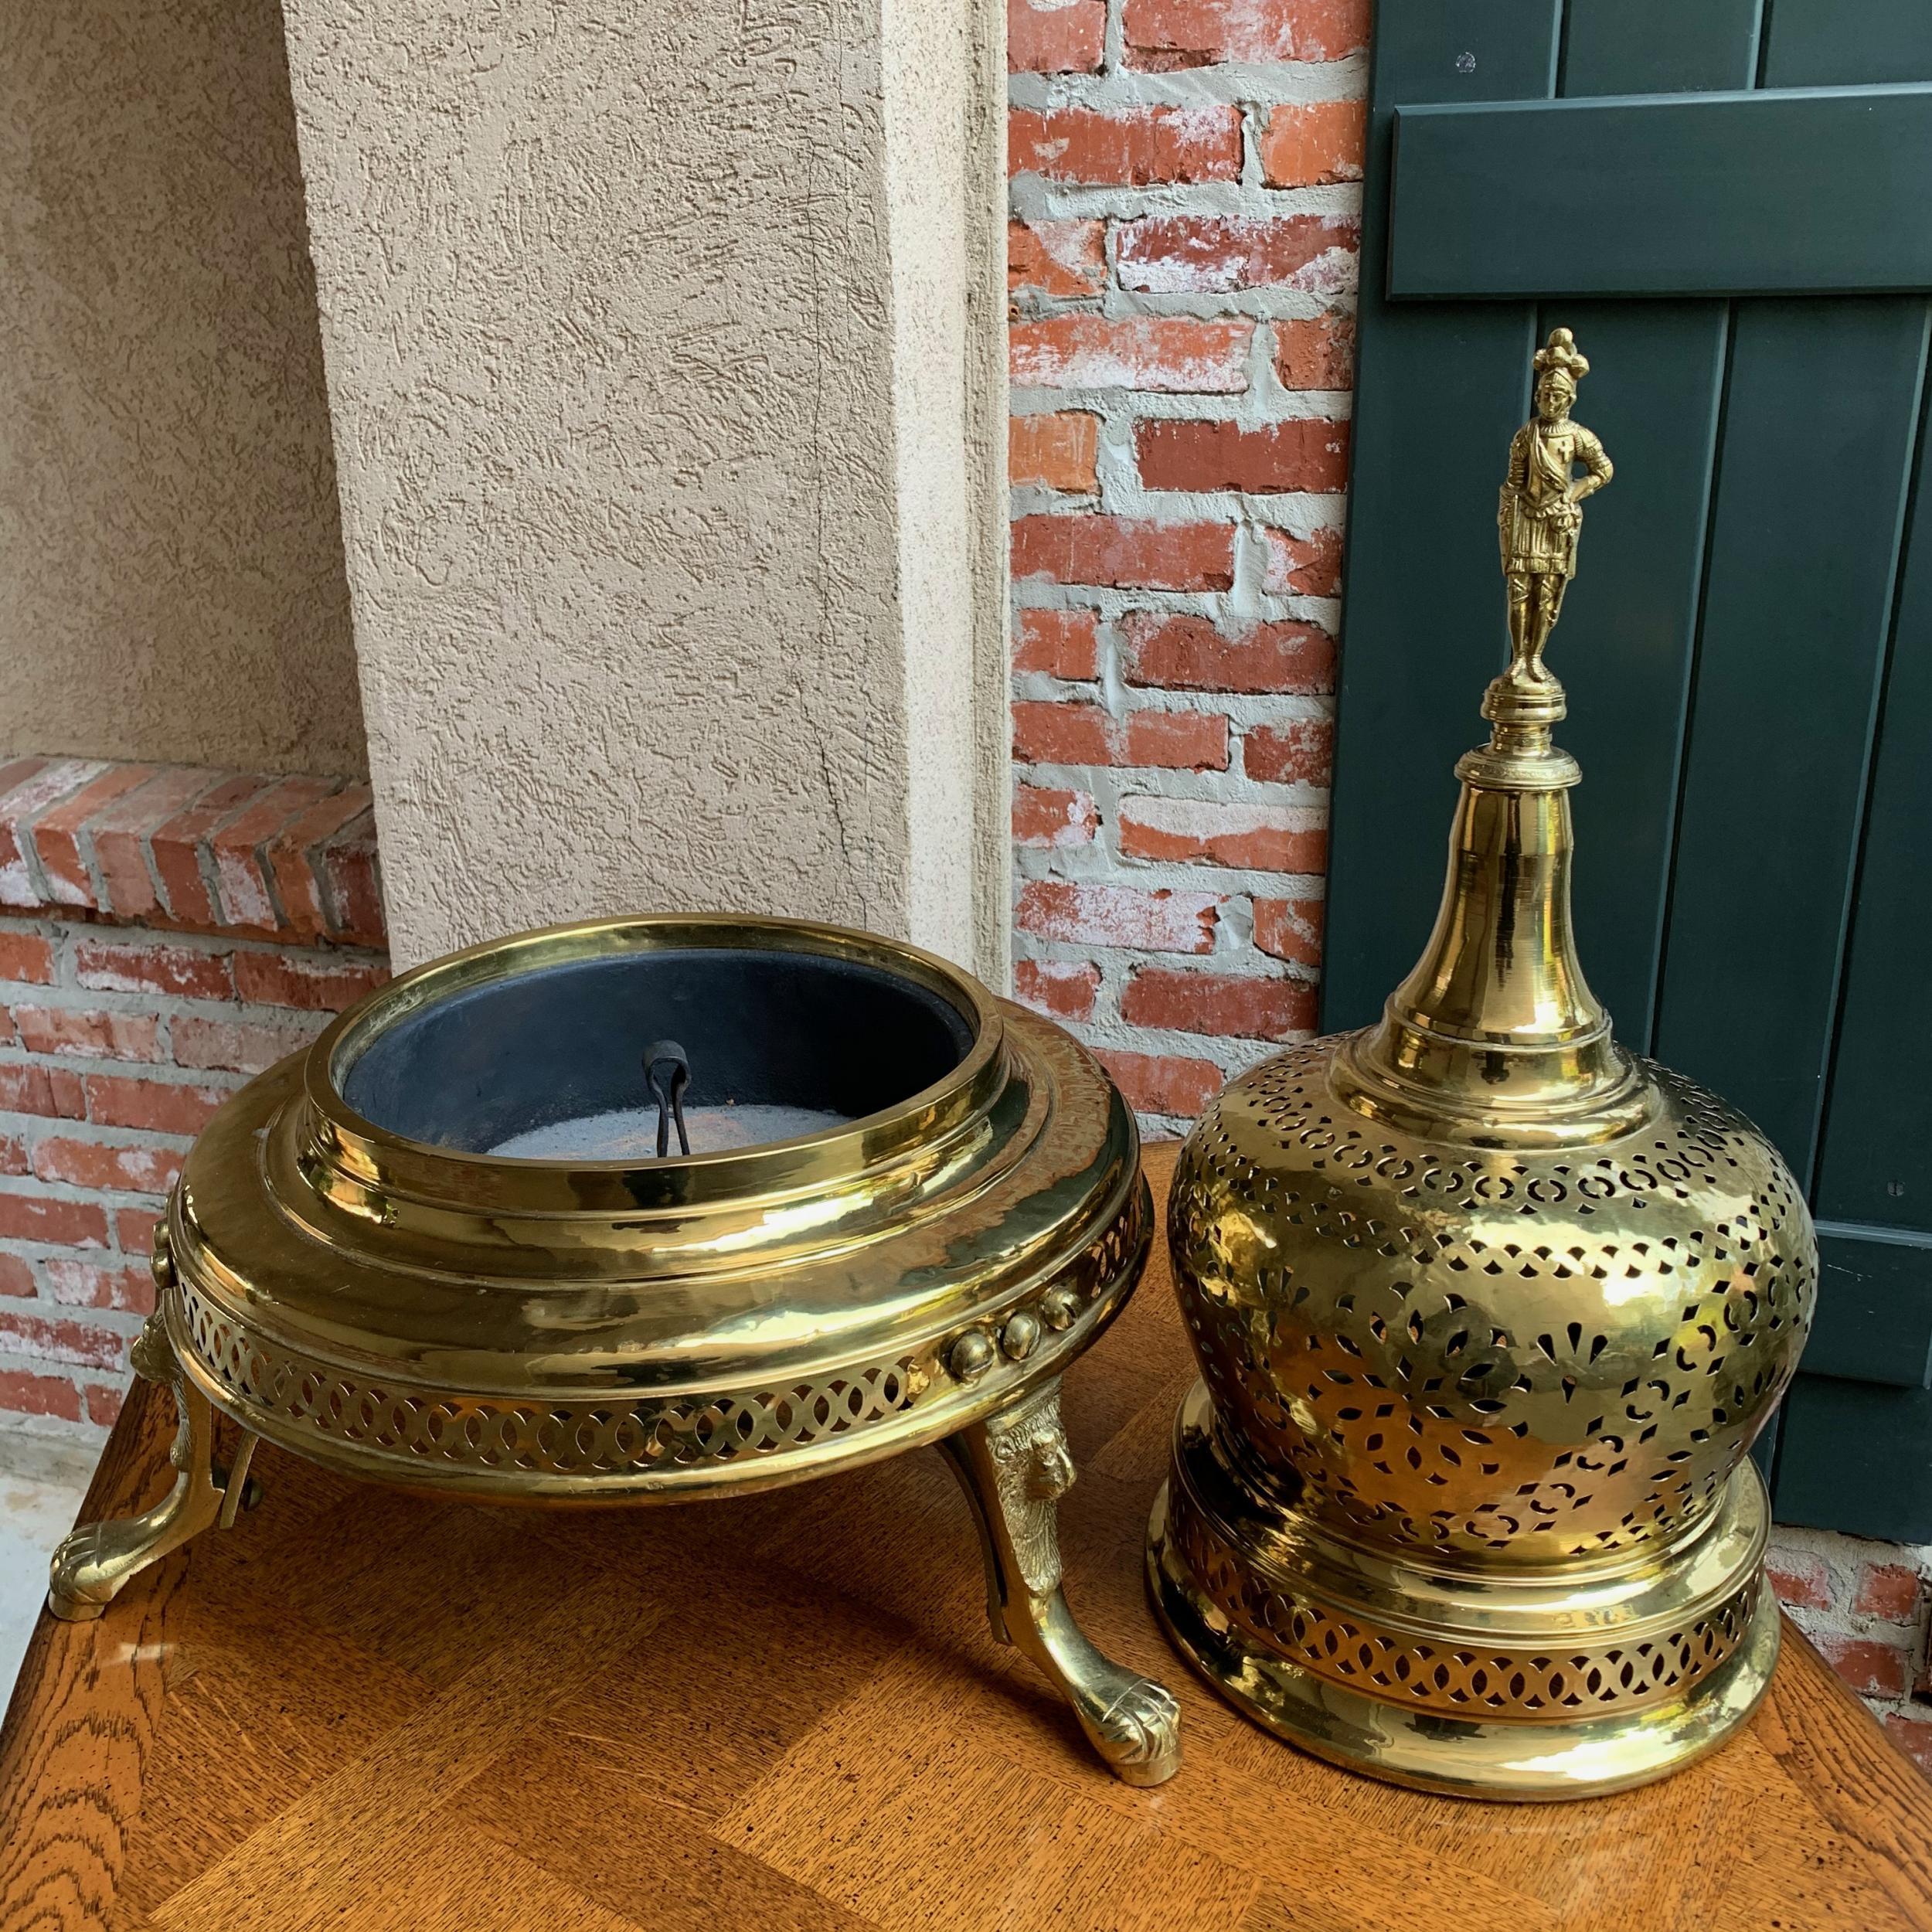 Vintage French Polished Brass Bell Brazier Heater Fire Pit Incense For Sale 3